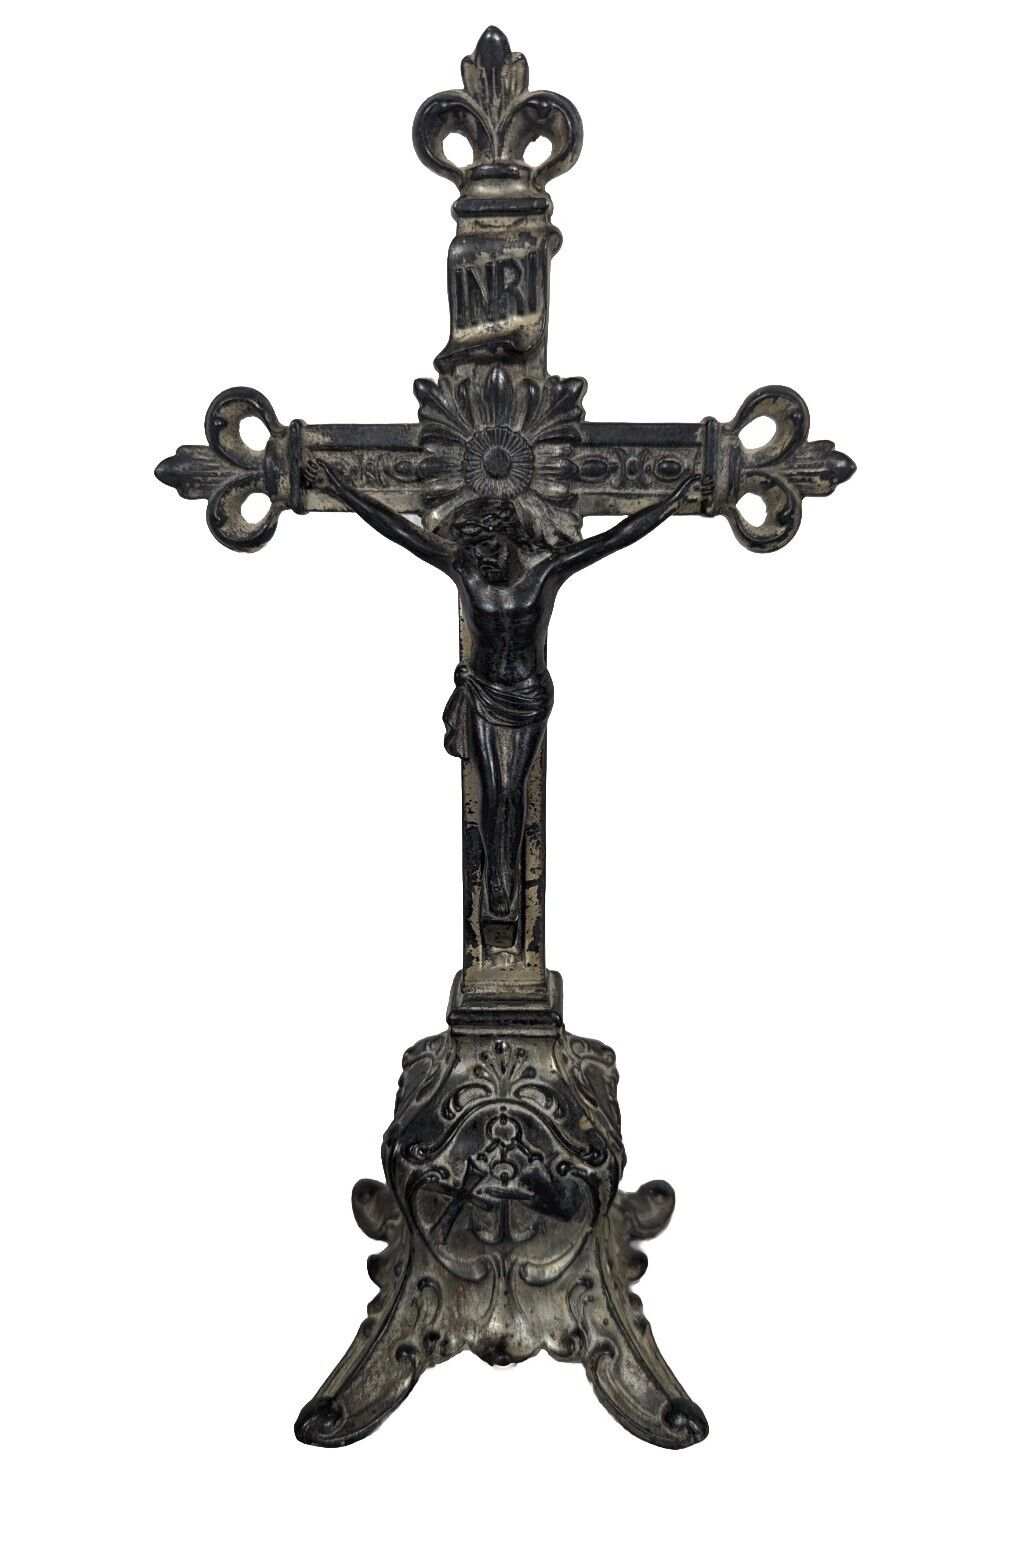 Vintage 1927 Marked Jenning Brothers Metal Spelter Crucifix 10